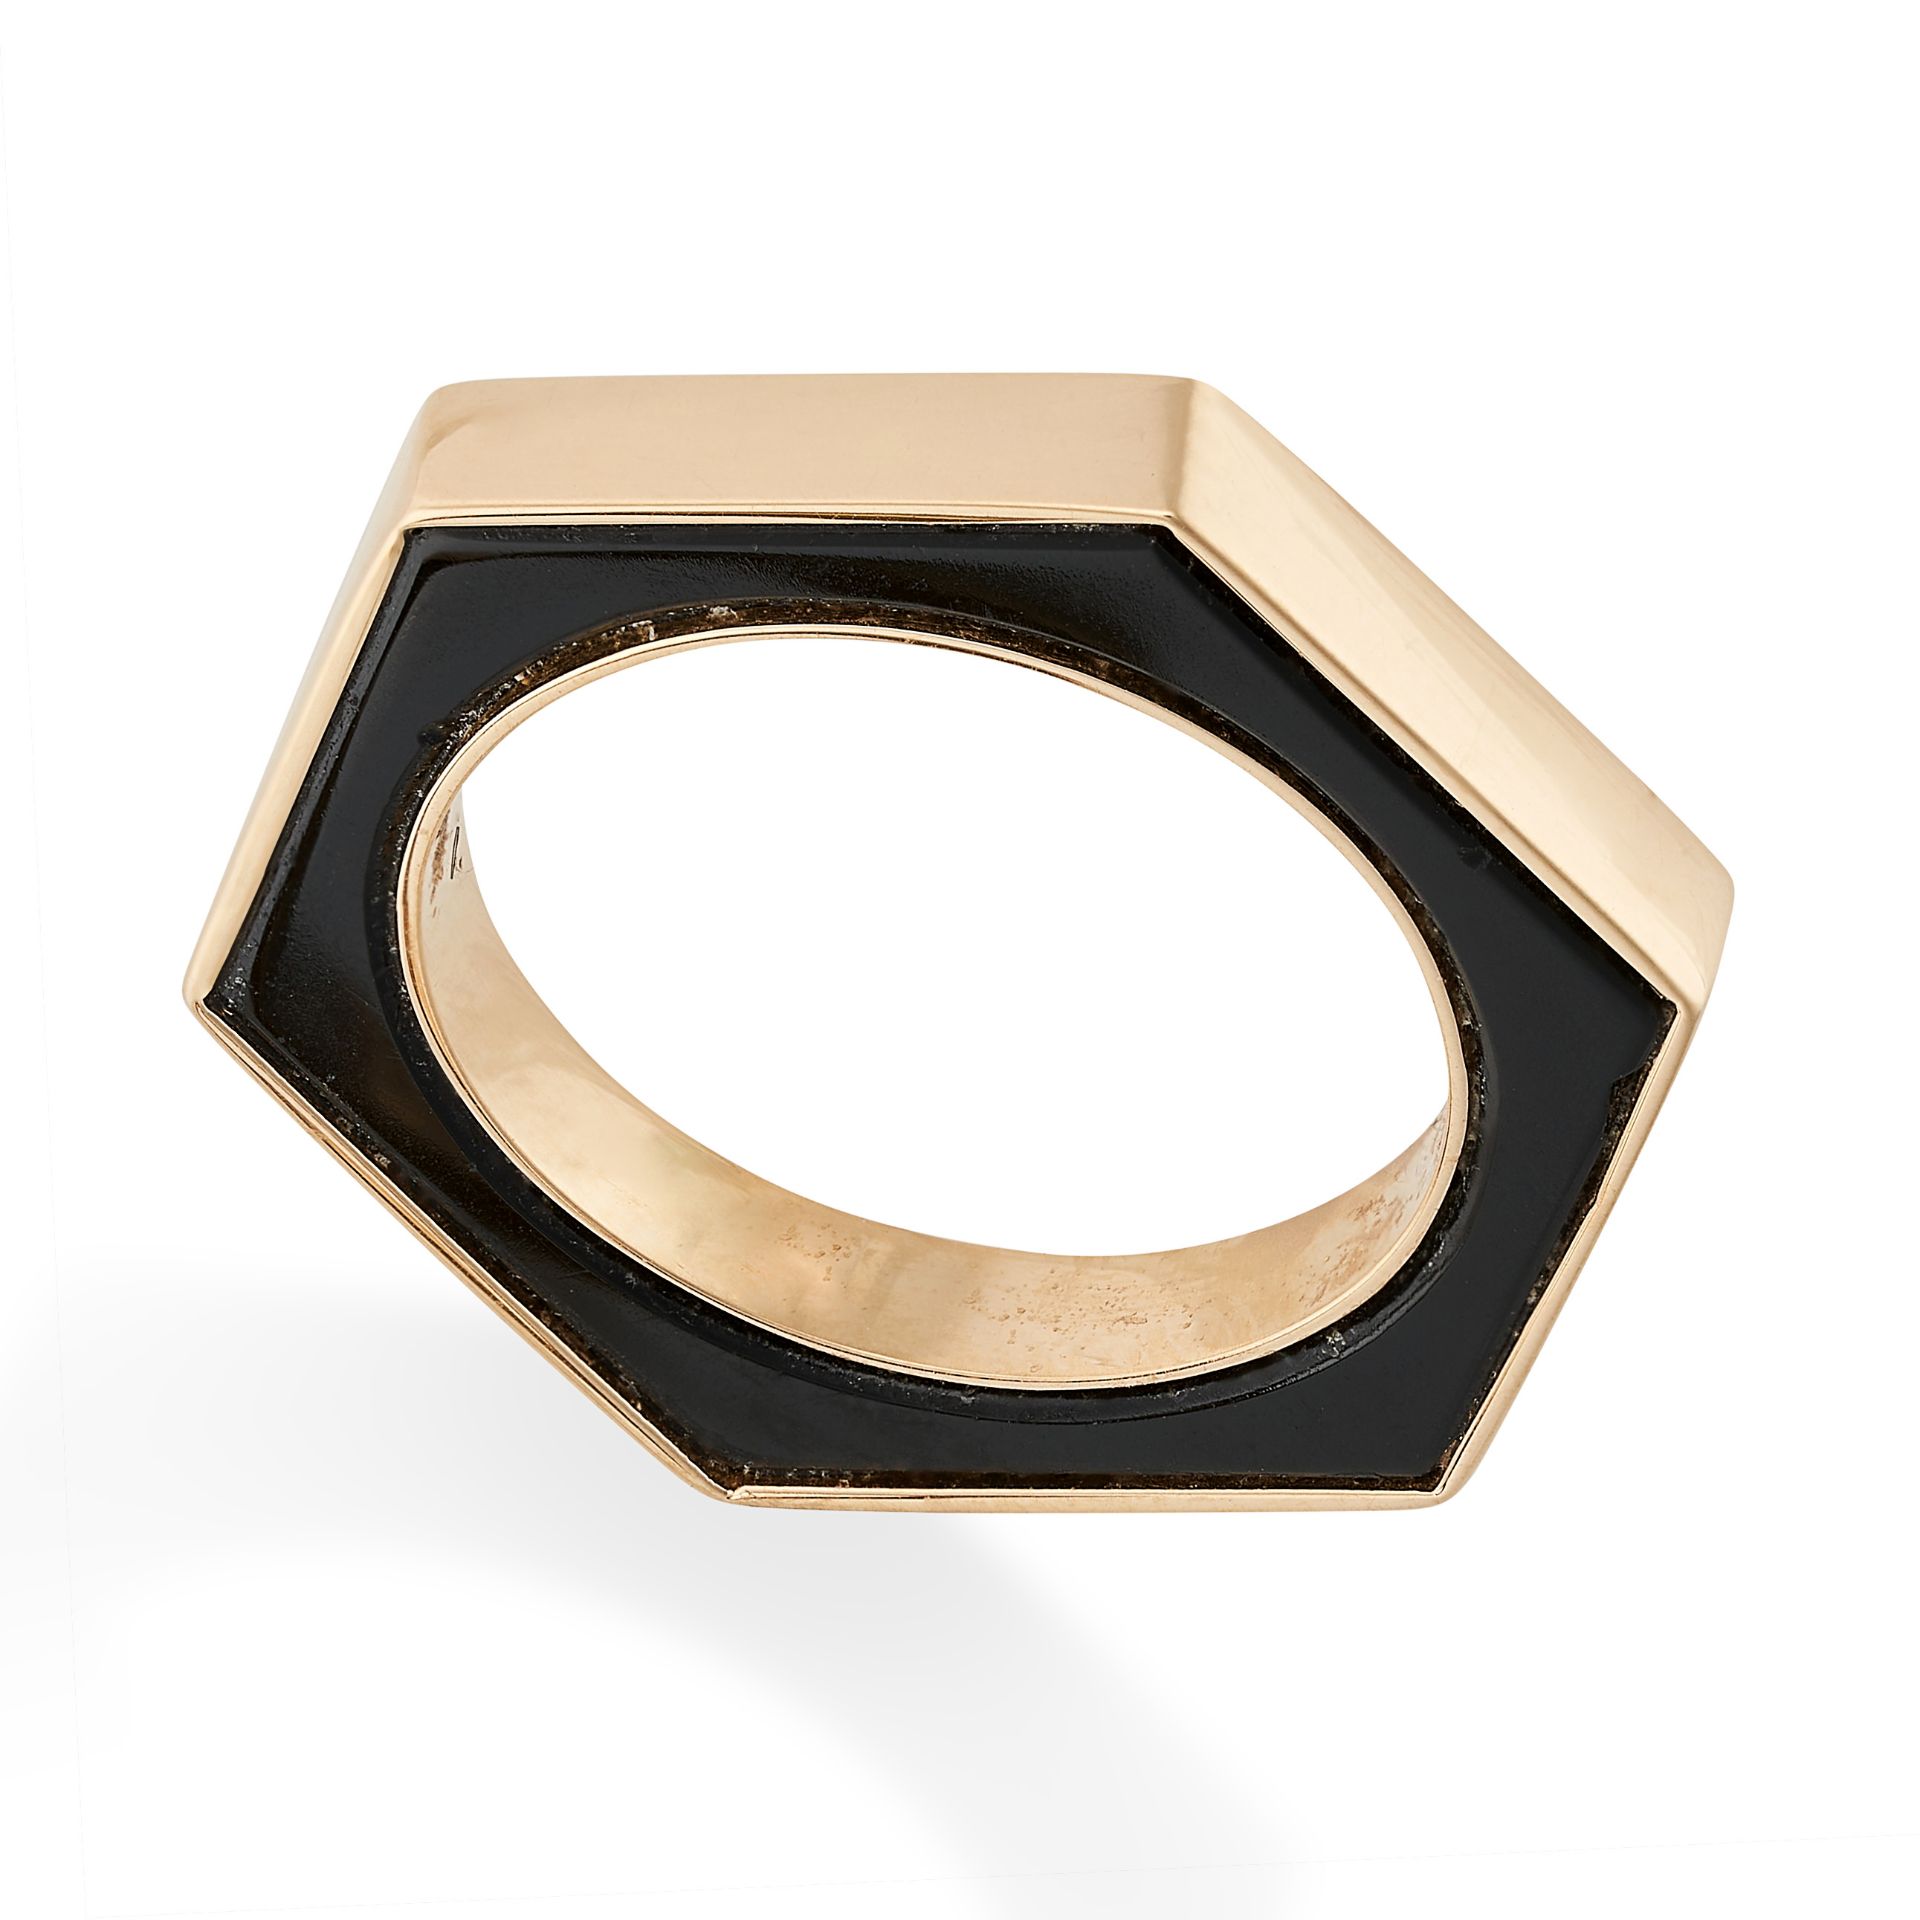 AN ONYX RING / PENDANT in 18ct yellow gold, in hexagonal design set on both sides with polished o...